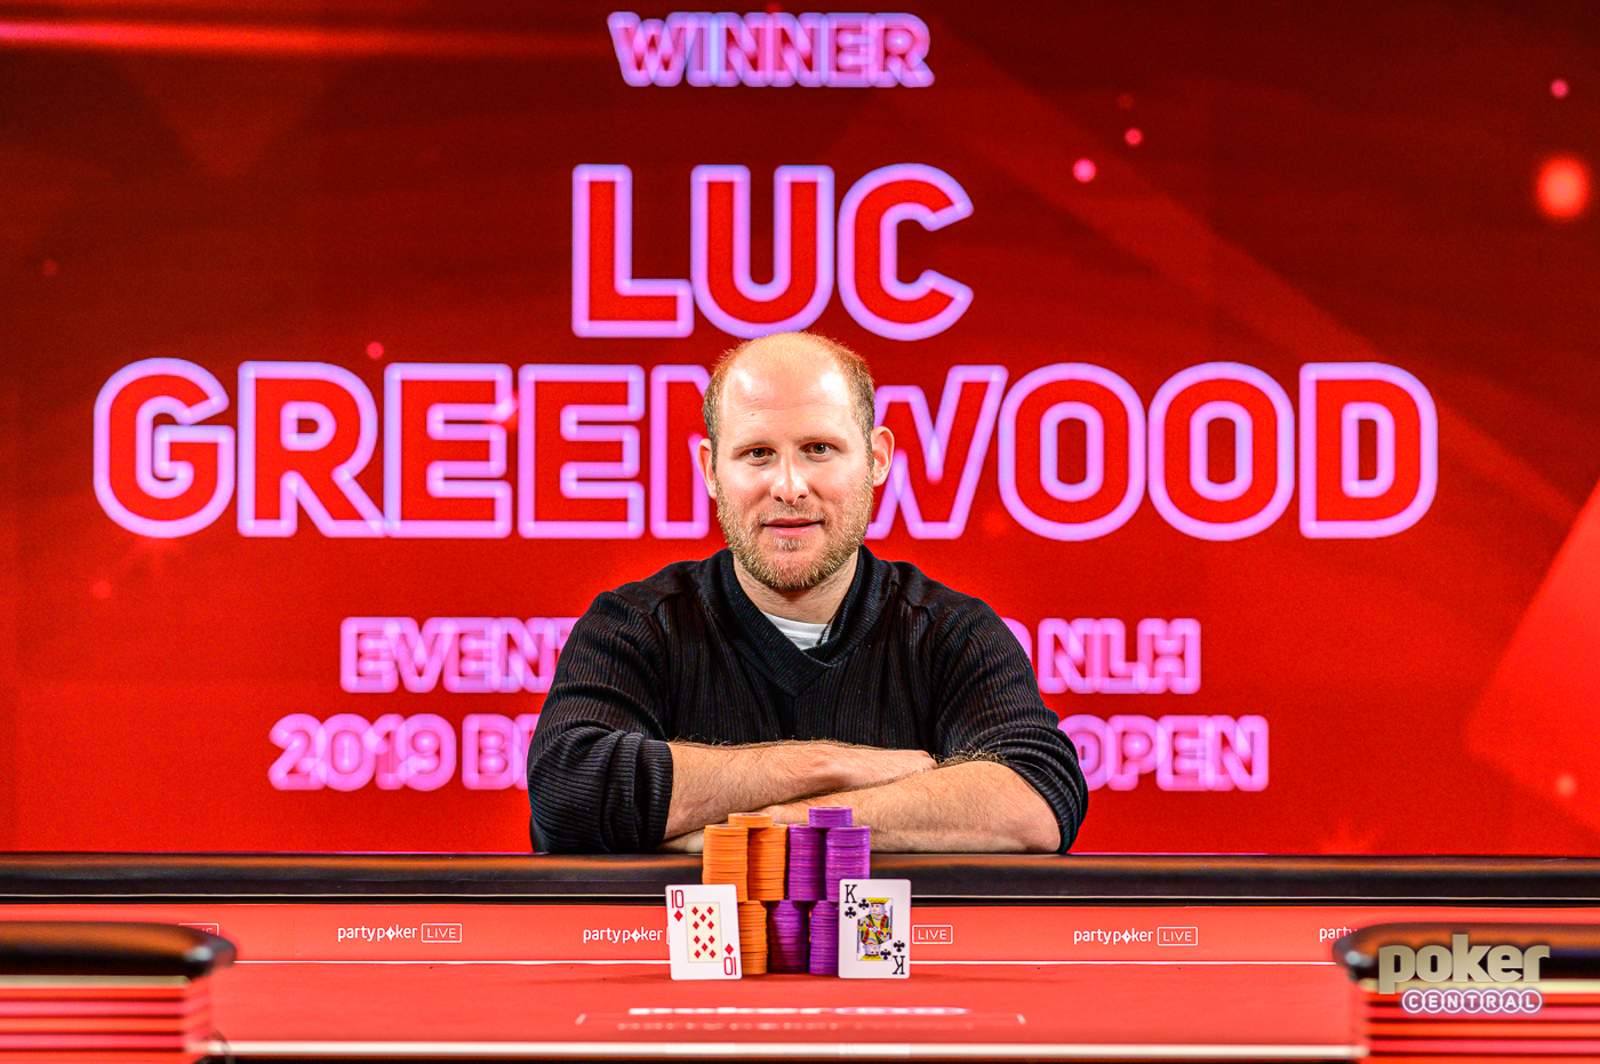 Luc Greenwood Wins Opening Event of 2019 British Poker Open for £119,600